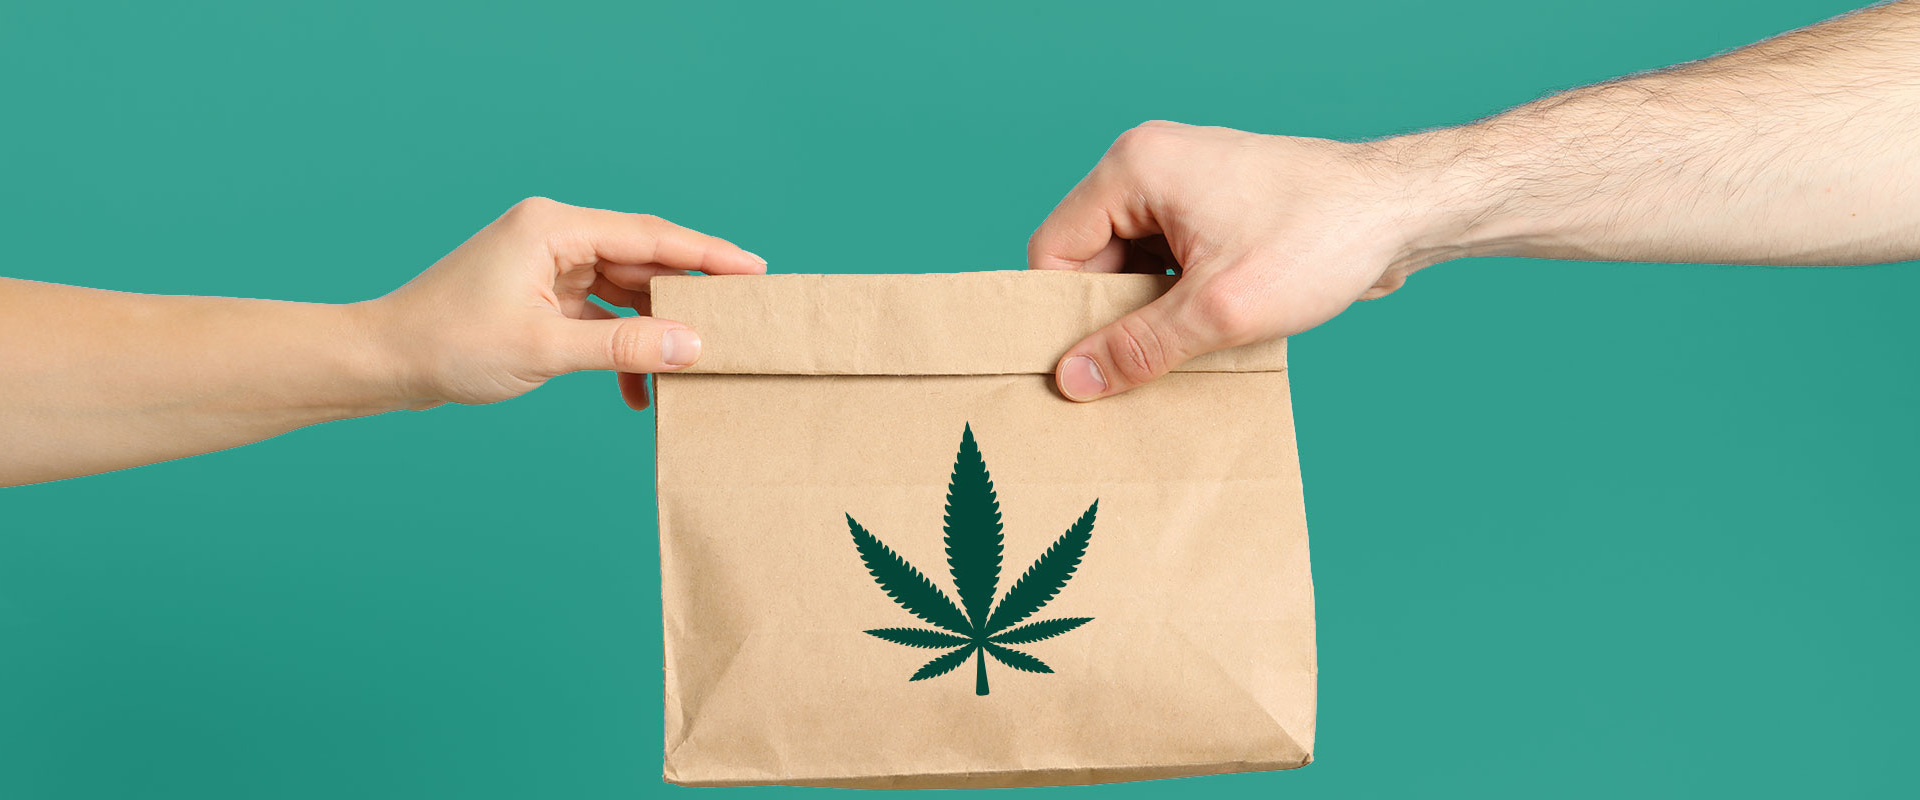 Will dispensaries deliver?